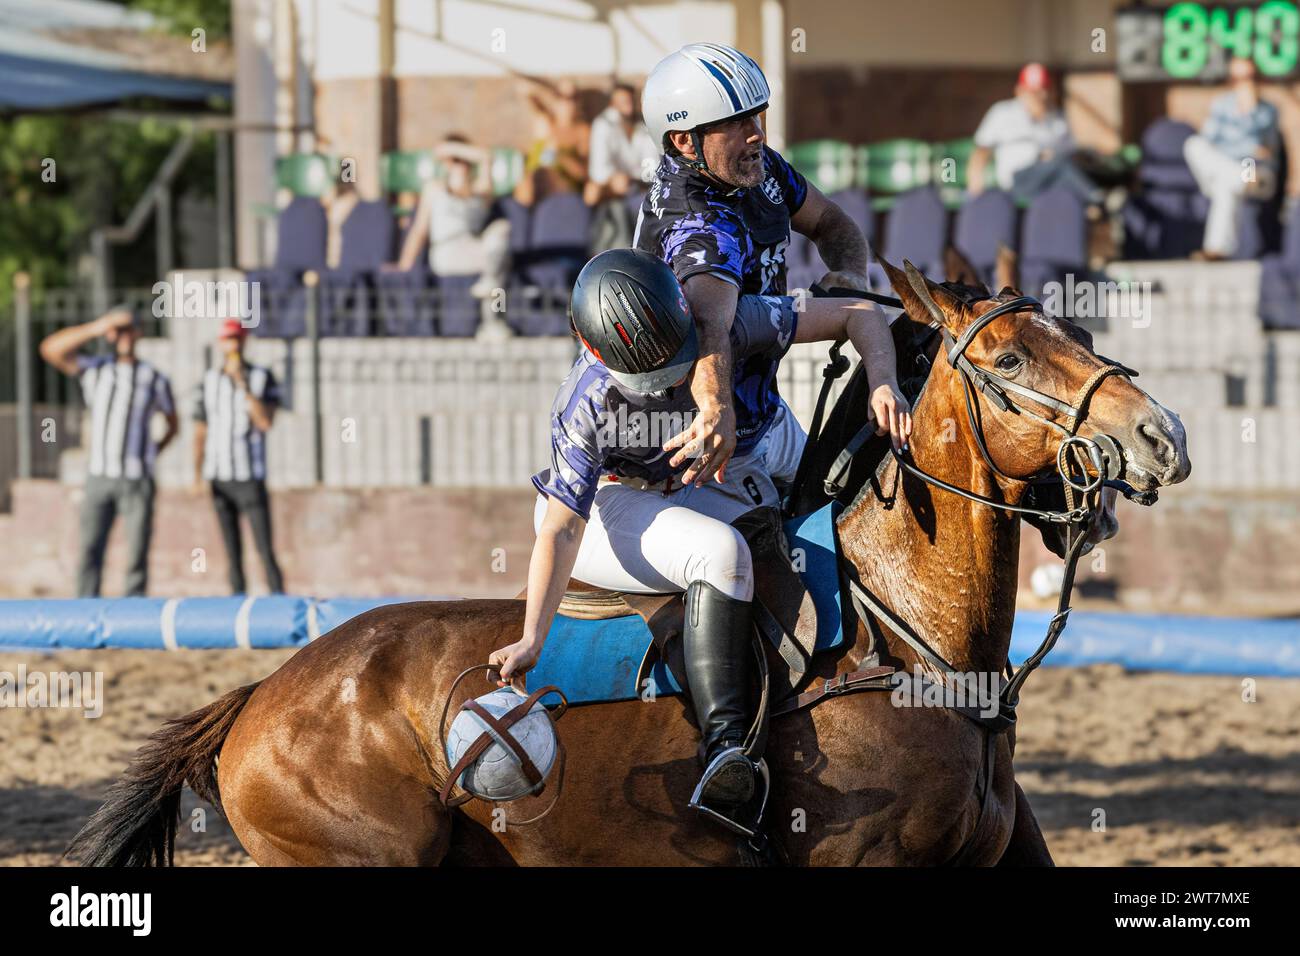 Buenos Aires, Argentina. 9th Mar, 2024. The Argentinian Nicola Taberna of team Cavalier and Spain's Marian of team A&R, seen in action during the final of the Open Horseball Argentina held at the Regimiento de Granaderos a Caballo. The result: Cavalier 5:3 H&R. The International Tournament ''Open Horseball Argentina'' was played at the Regimiento de Granaderos a Caballo General San MartÃ-n, in the city of Buenos Aires, on March 7, 8 and 9 for promotional purposes. It was the prelude to the Horseball World Championship 2025 to be held in Argentina. Three matches were played on each date. The Stock Photo